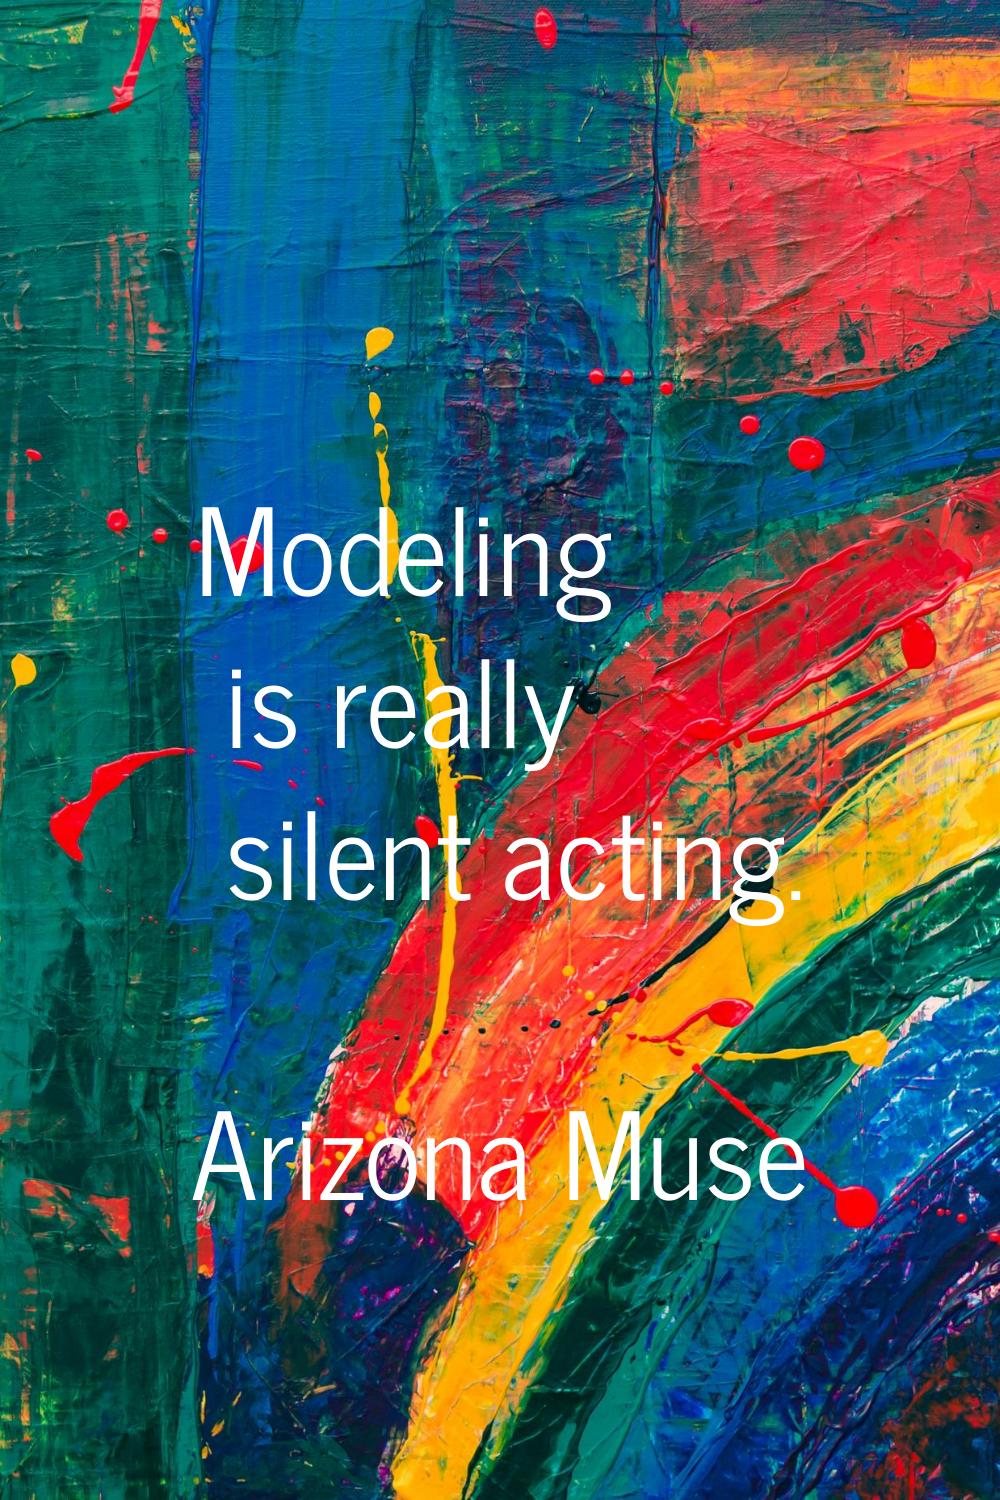 Modeling is really silent acting.